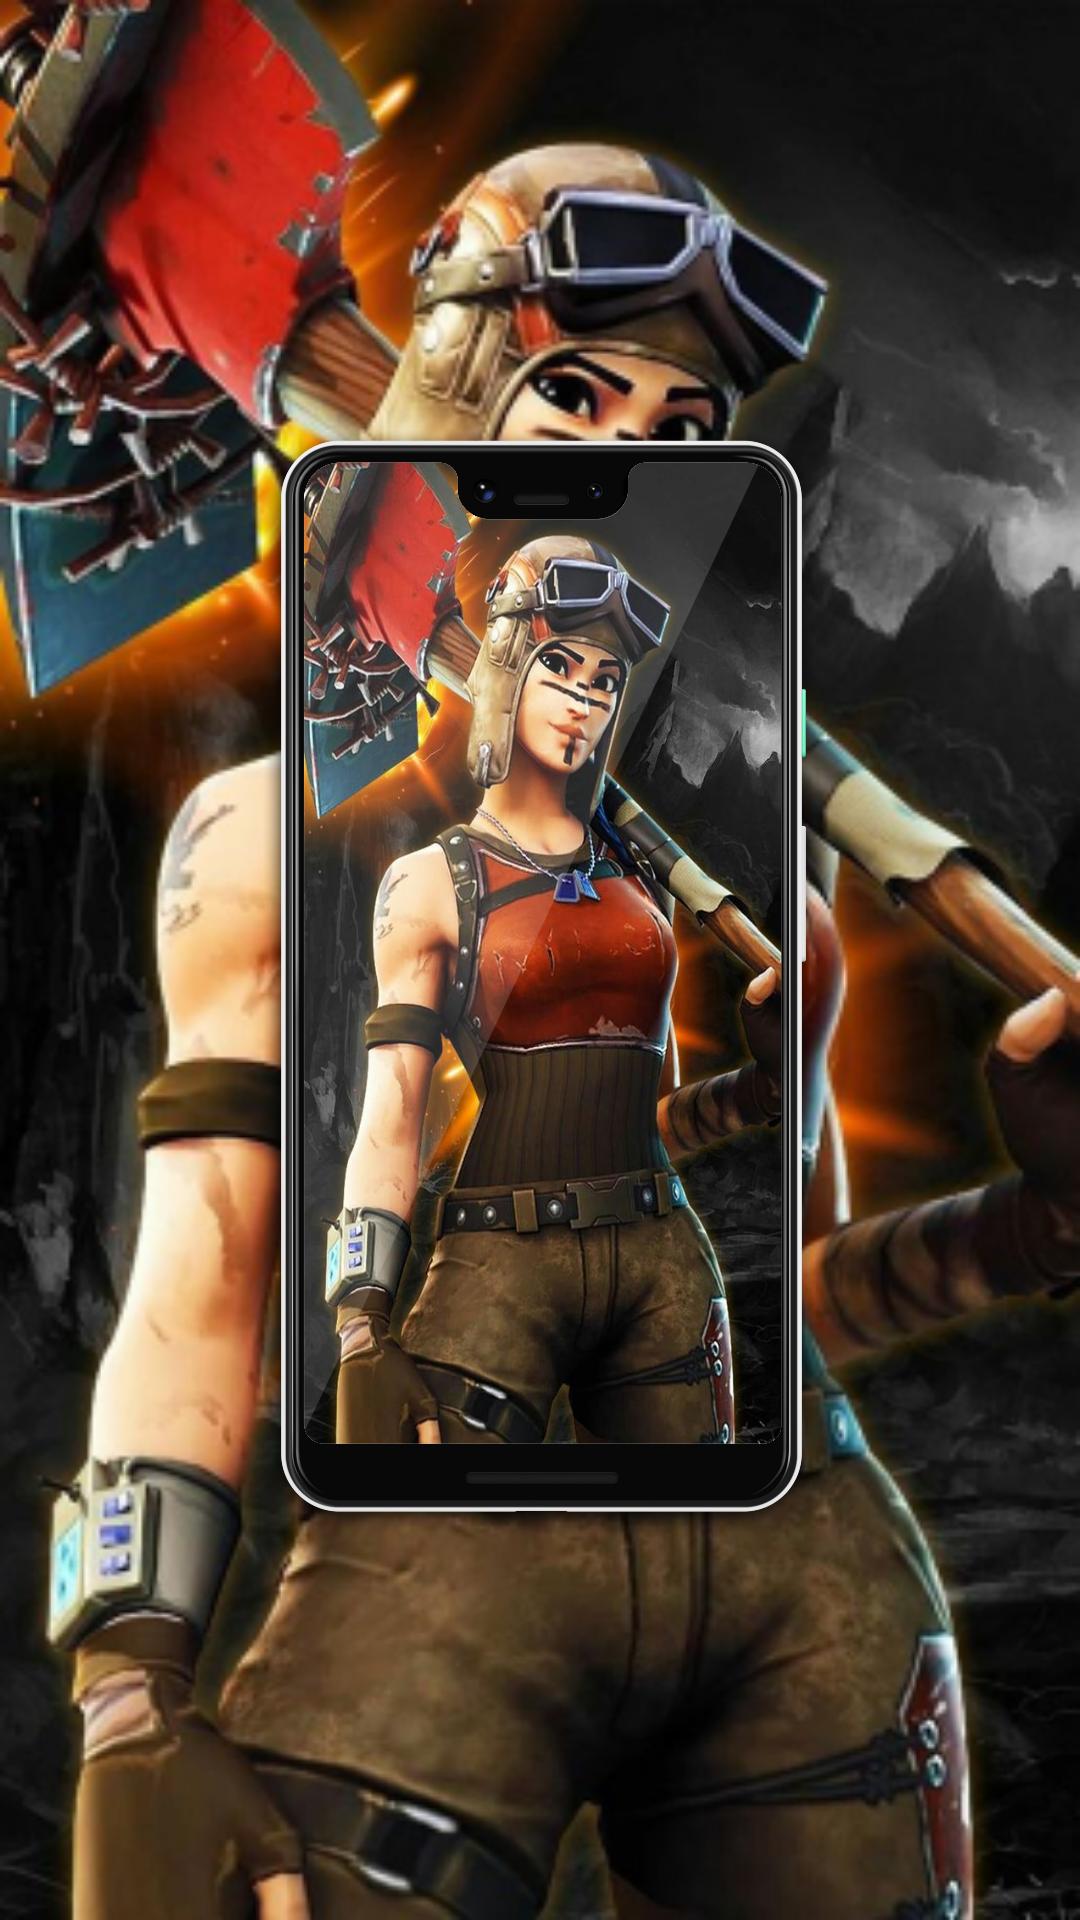 Battle Royale Chapter 2 Wallpapers 2019 For Android Apk Download